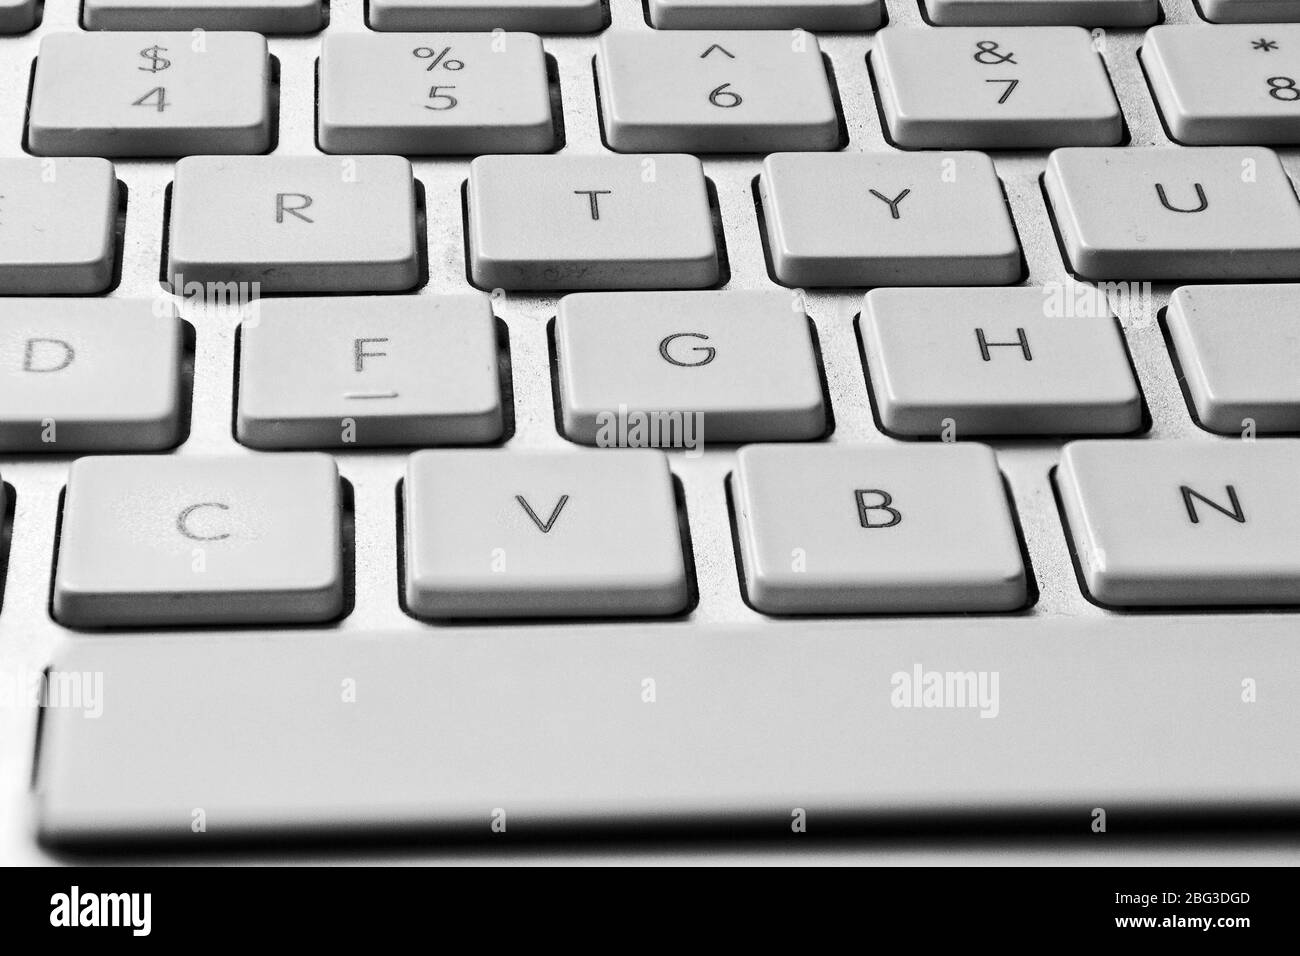 Close-up image of the middle section of a silver coloured computer keyboard clearly showing white keys 4, 5, 6, 7, R, T, Y, F, G, H, V, B and N with a Stock Photo